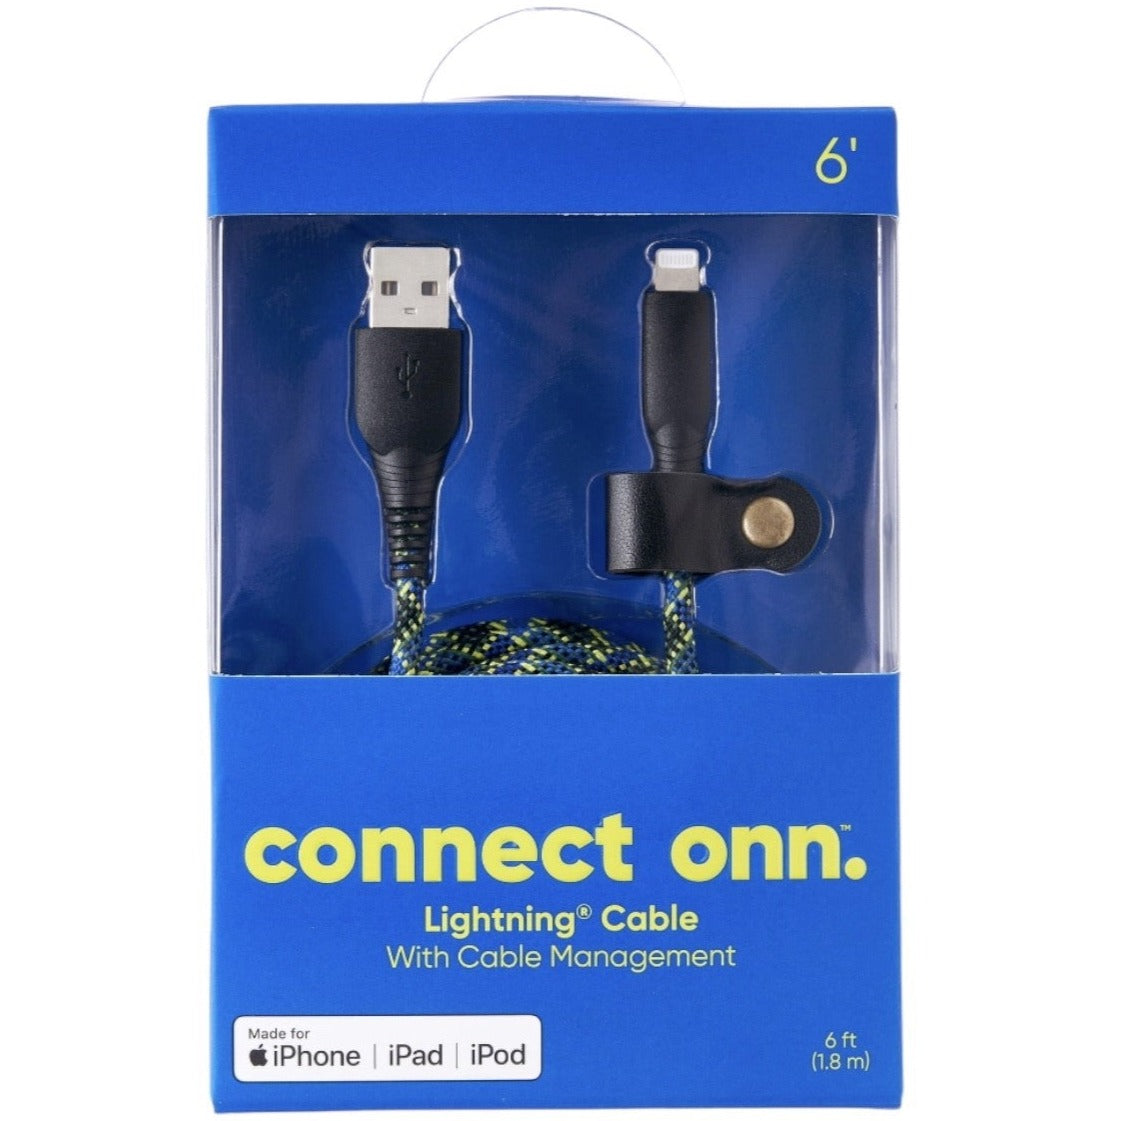 Connect Onn USB To Lightning Cable 6 Ft W/Cable Management - Wholesale Lot Of 20